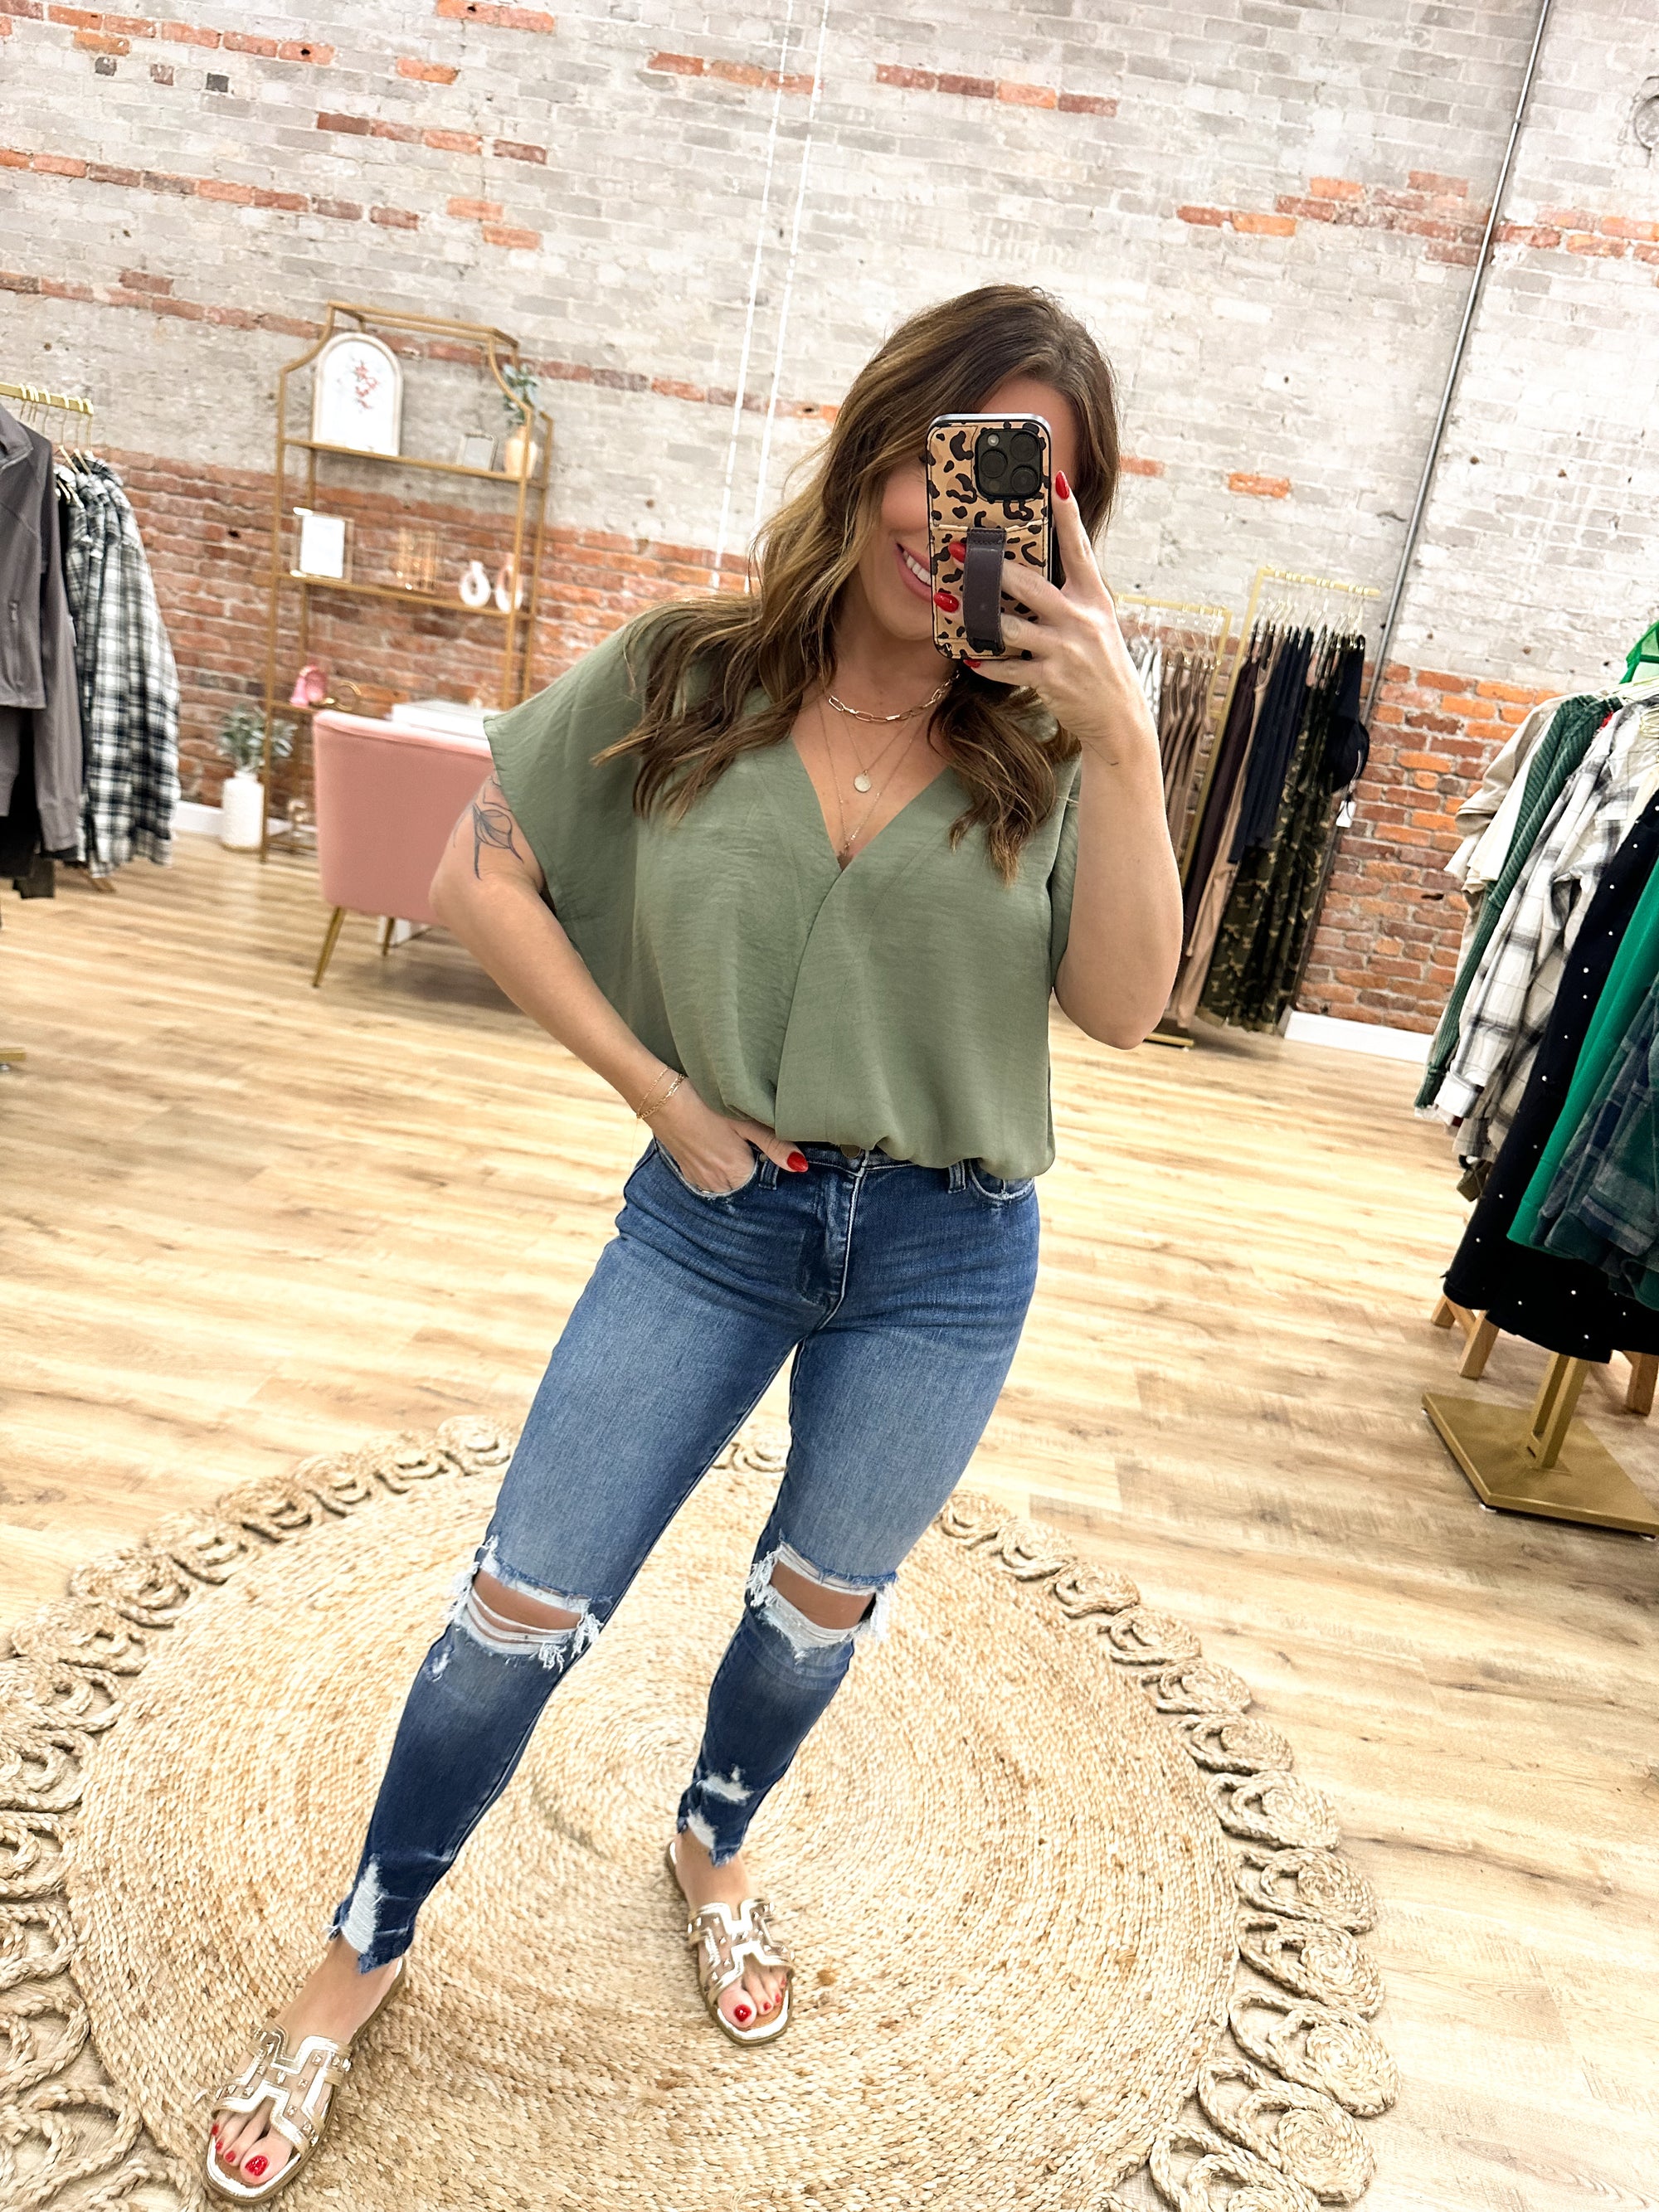 Seal The Deal Blouse Bodysuit - Olive